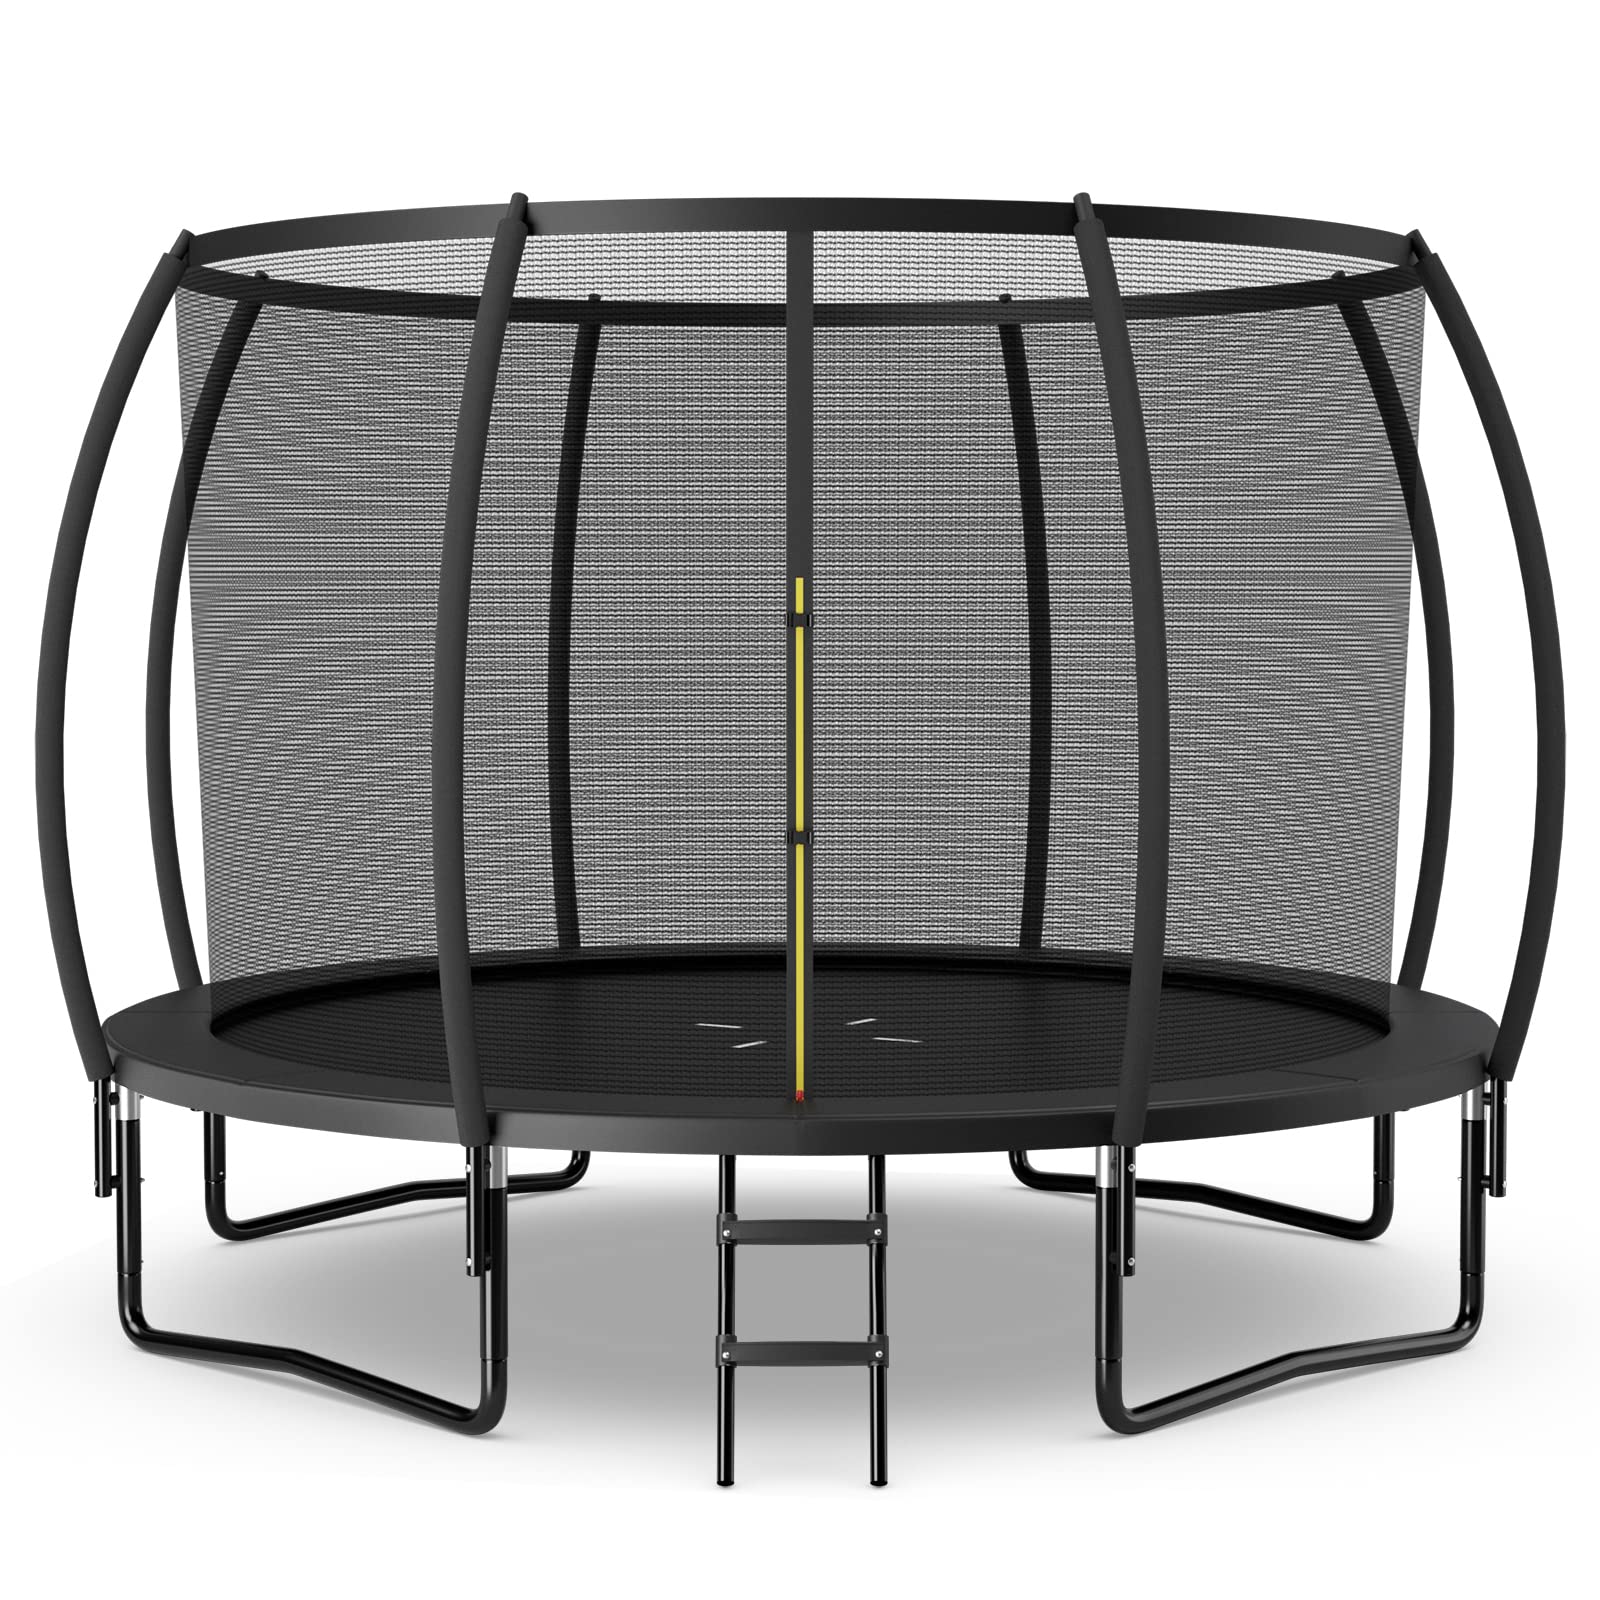 Giantex 8FT 10FT 12FT Trampoline with Enclosure, ASTM Approved Outdoor Large Trampoline with Ladder